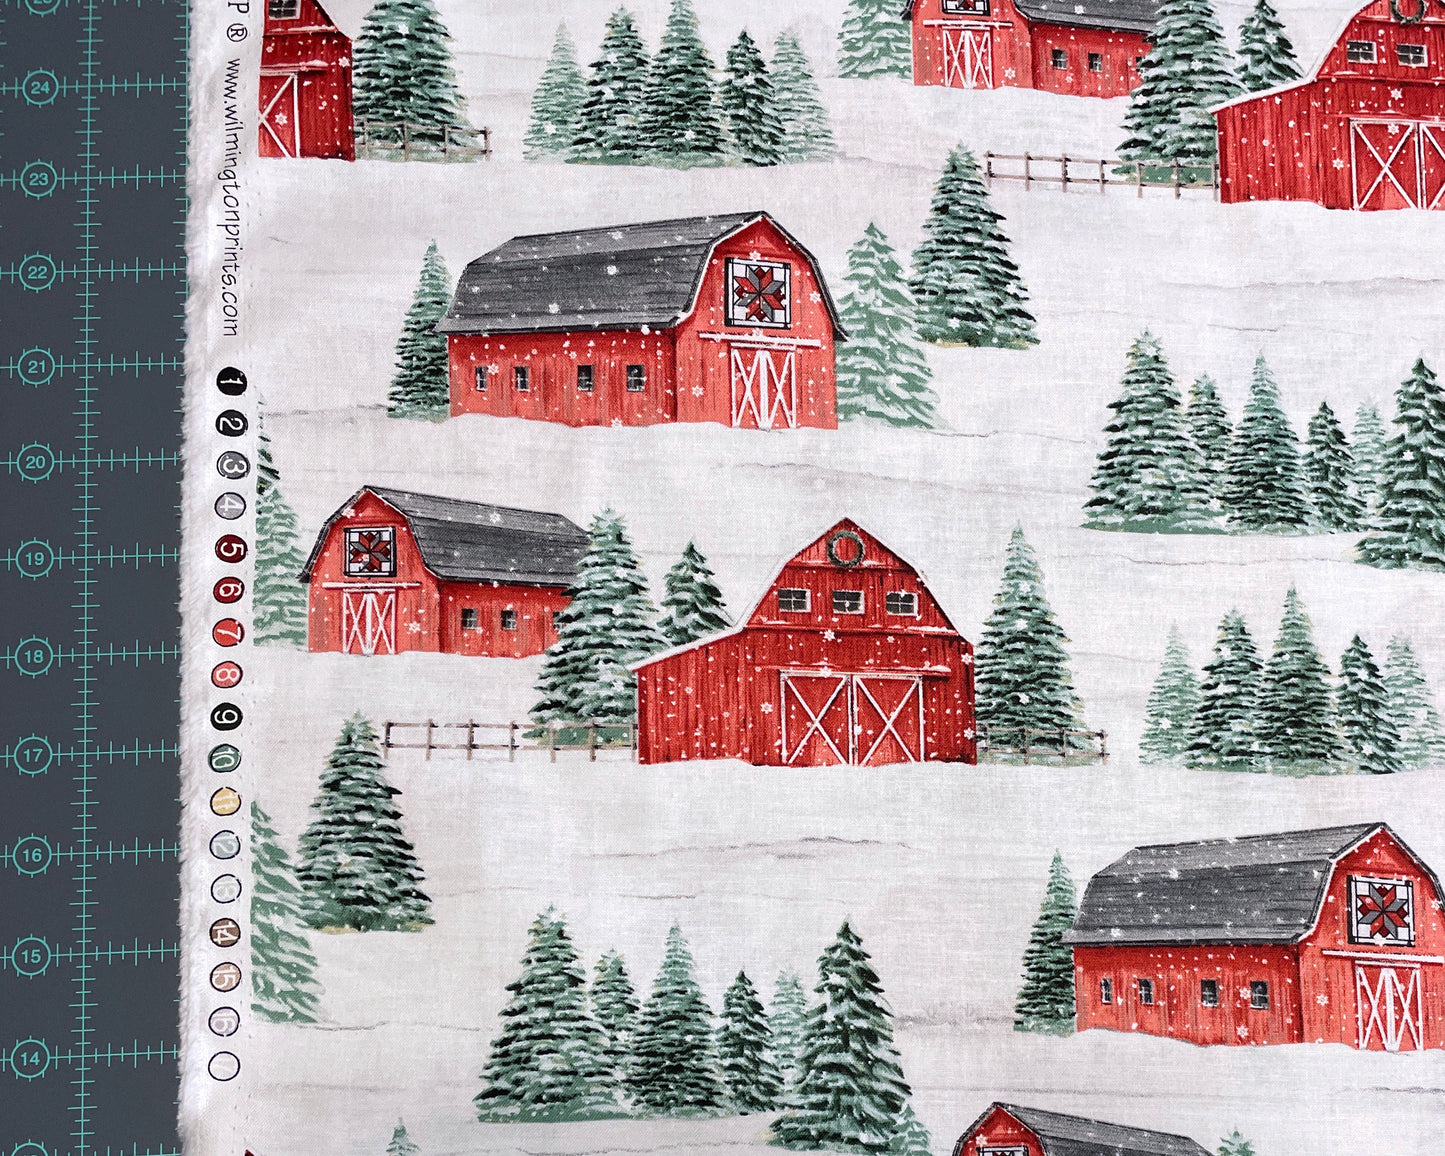 Red Barn Fabric - NEW! Country Cardinals Collection by Wilmington Prints - 100% woven cotton - Snowy Christmas Tree Farm - Ships NEXT DAY